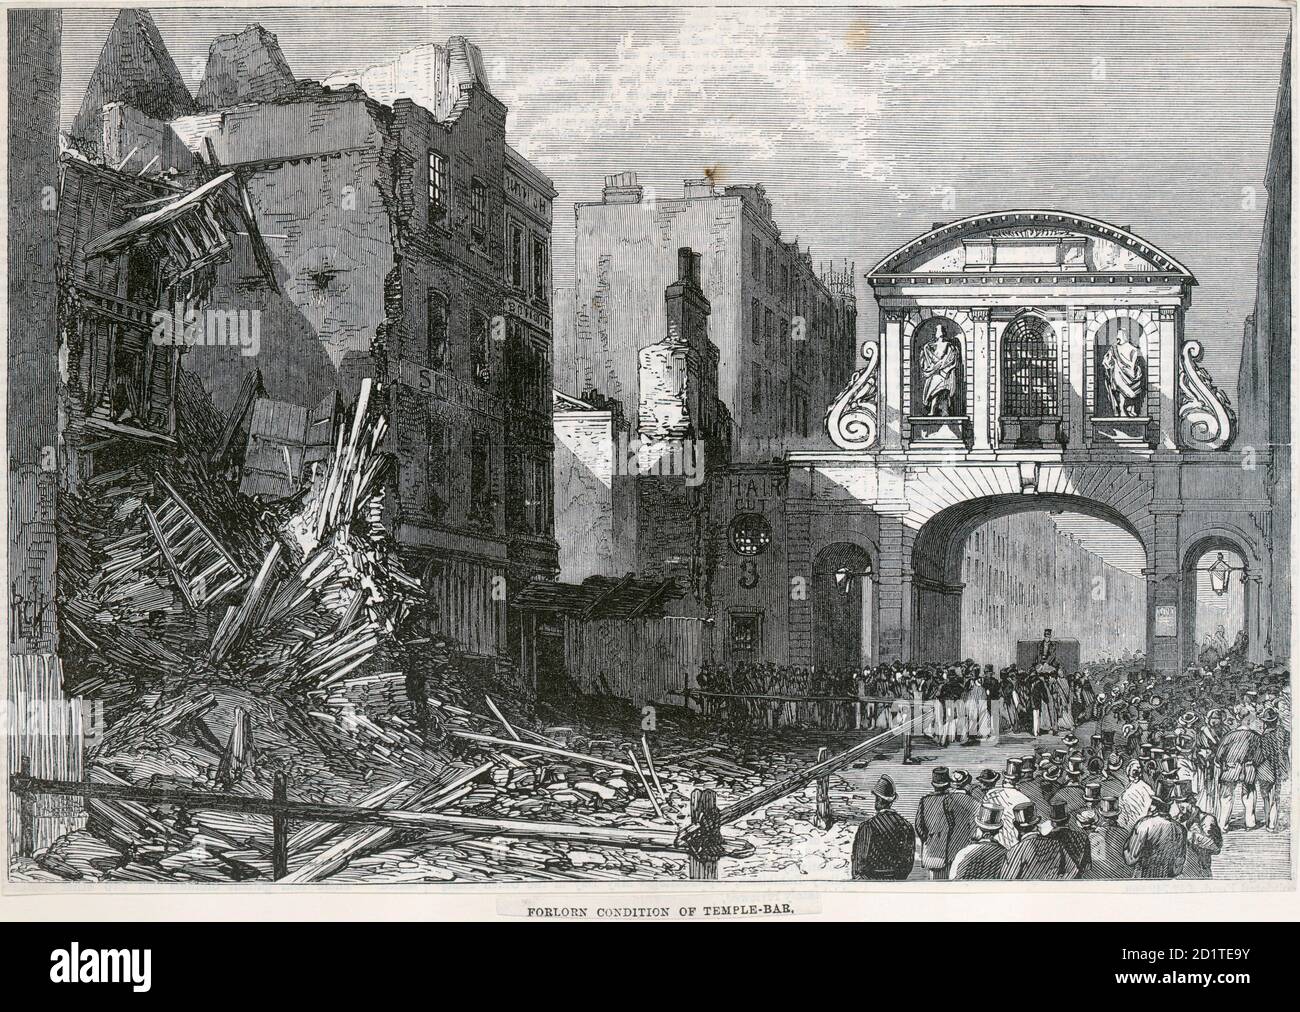 MAYSON BEETON COLLECTION. Temple Bar, City of London. 'Forlorn condition of Temple Bar' showing ruinous and collapsed adjoining buildings. This incarnation of Temple Bar (the gate between the Cities of London and Westminster) was constructed by Sir Christopher Wren in 1672. It was removed in 1878 in order to widen the road. A reconstruction using much of the original stonework can now be seen at Paternoster Square. Engraving dated 1877. Stock Photo